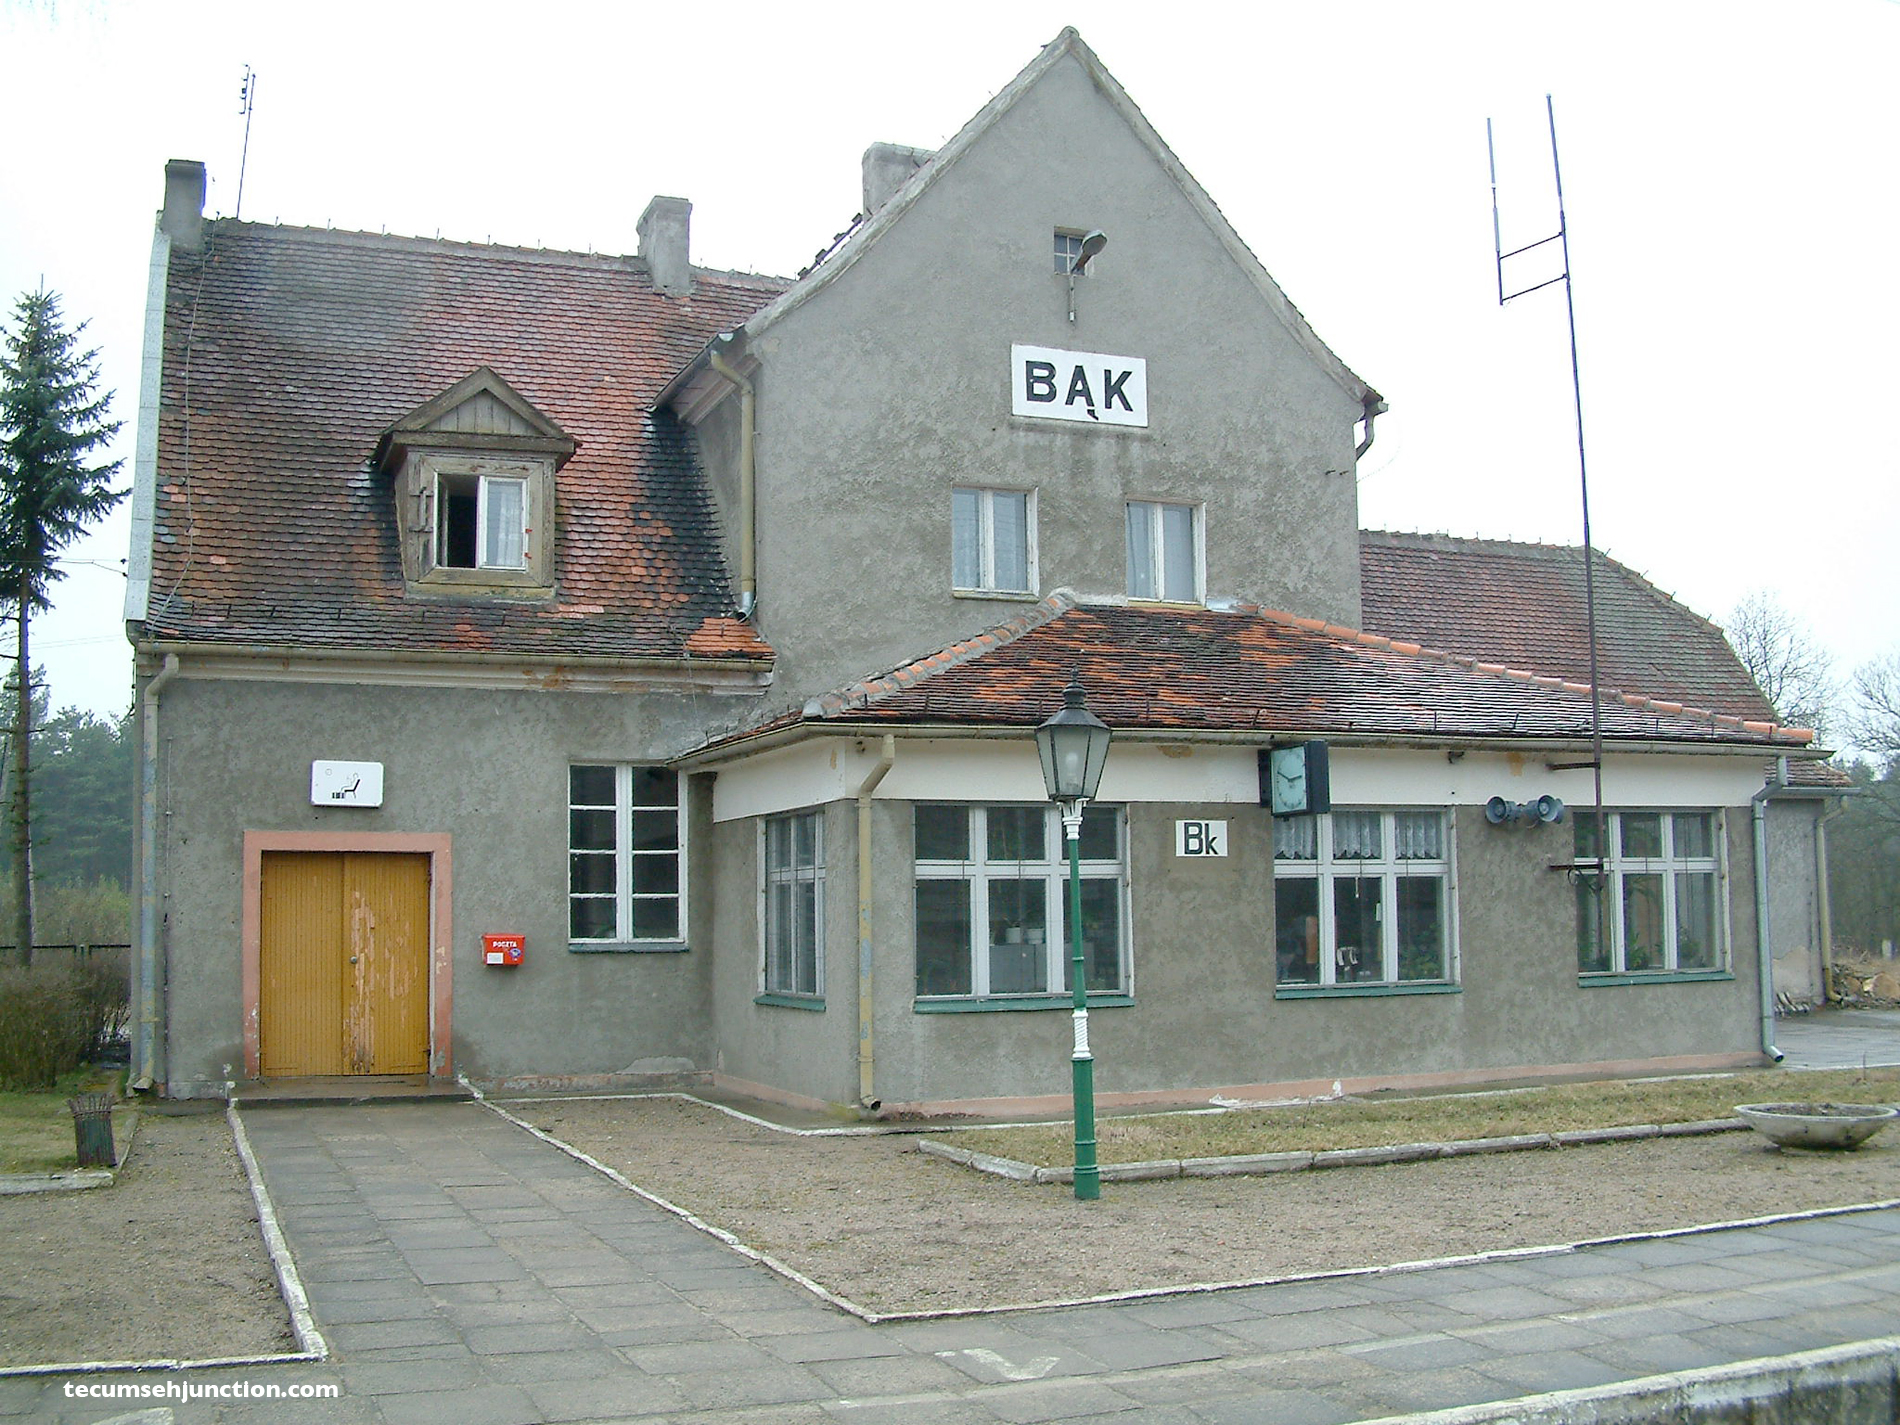 Bąk station with the signal box in front